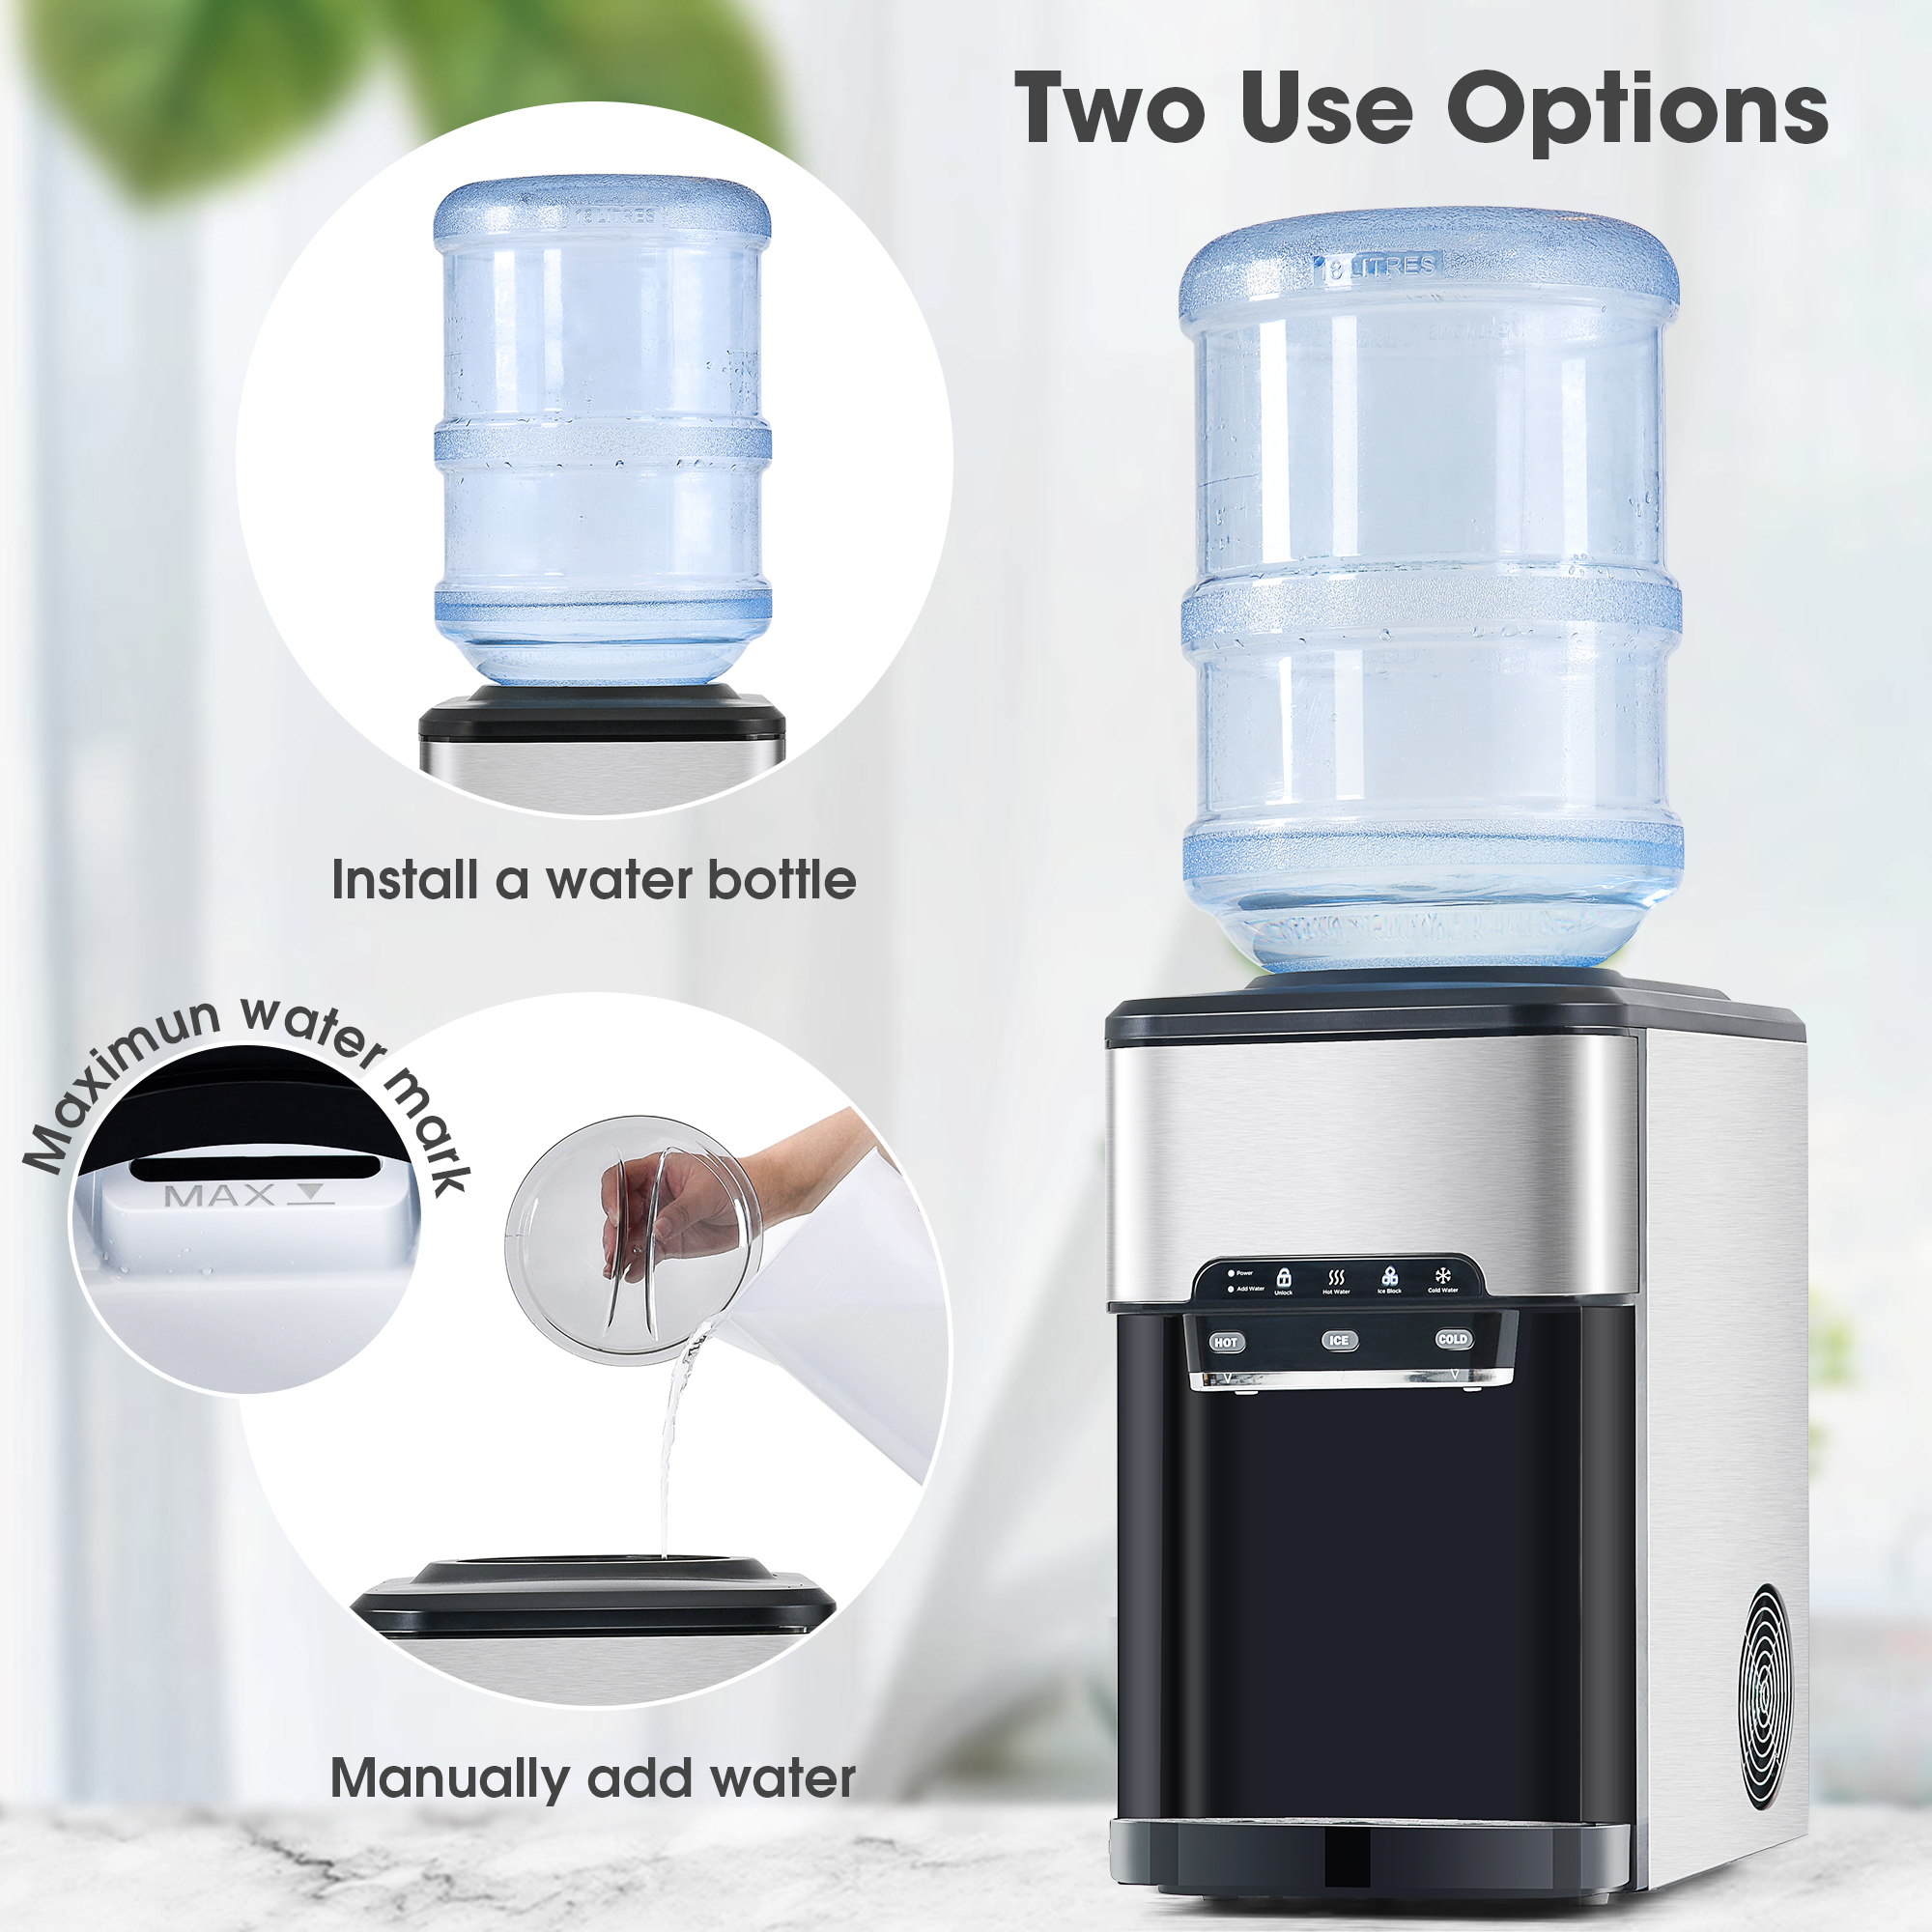 3 in 1 Water Dispenser with Ice Maker Machine Countertop, Portable Water Cooler, Quick 6 Mins Ice-making, Hot & Cold Water and Ice, Stainless Steel - image 3 of 10